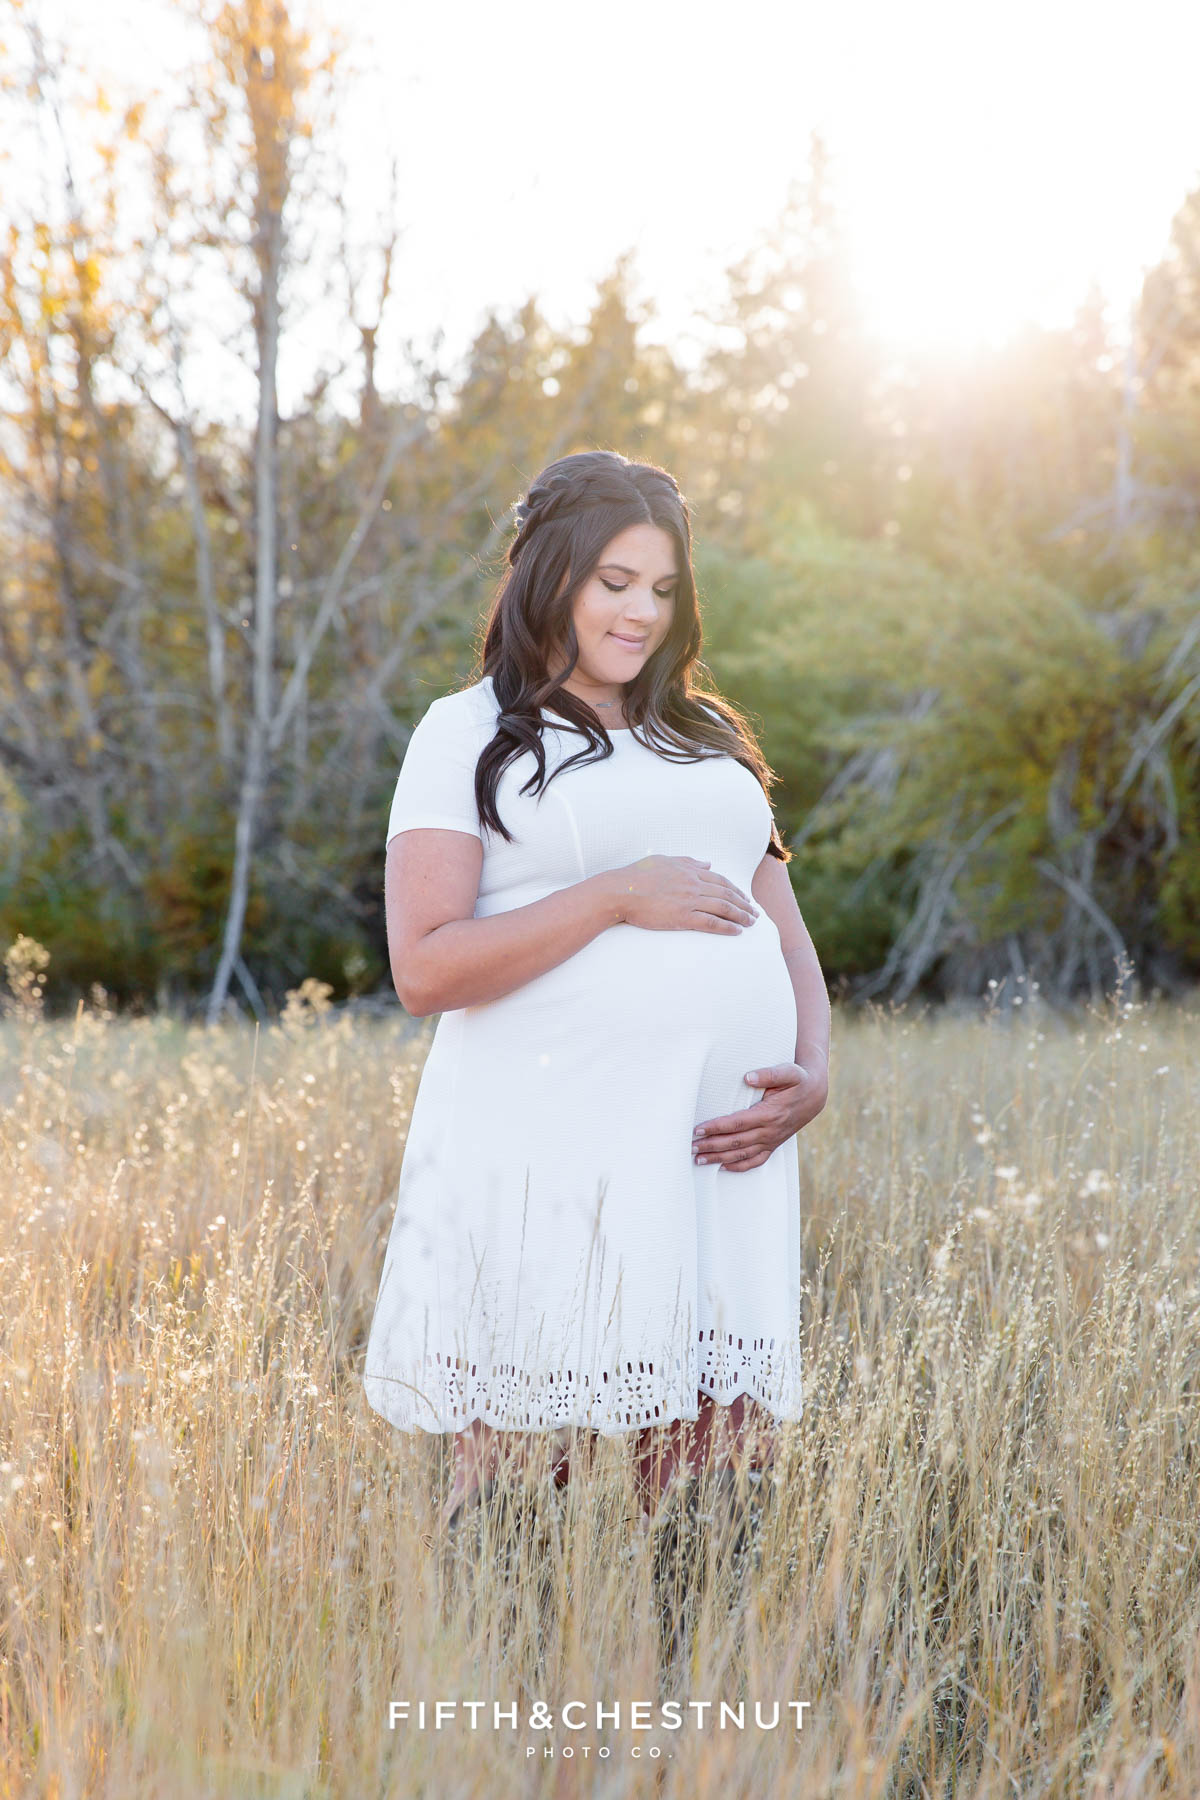 Pregnant woman in a white dress stands in a field and looks at her sweet baby bump for her fall maternity portraits